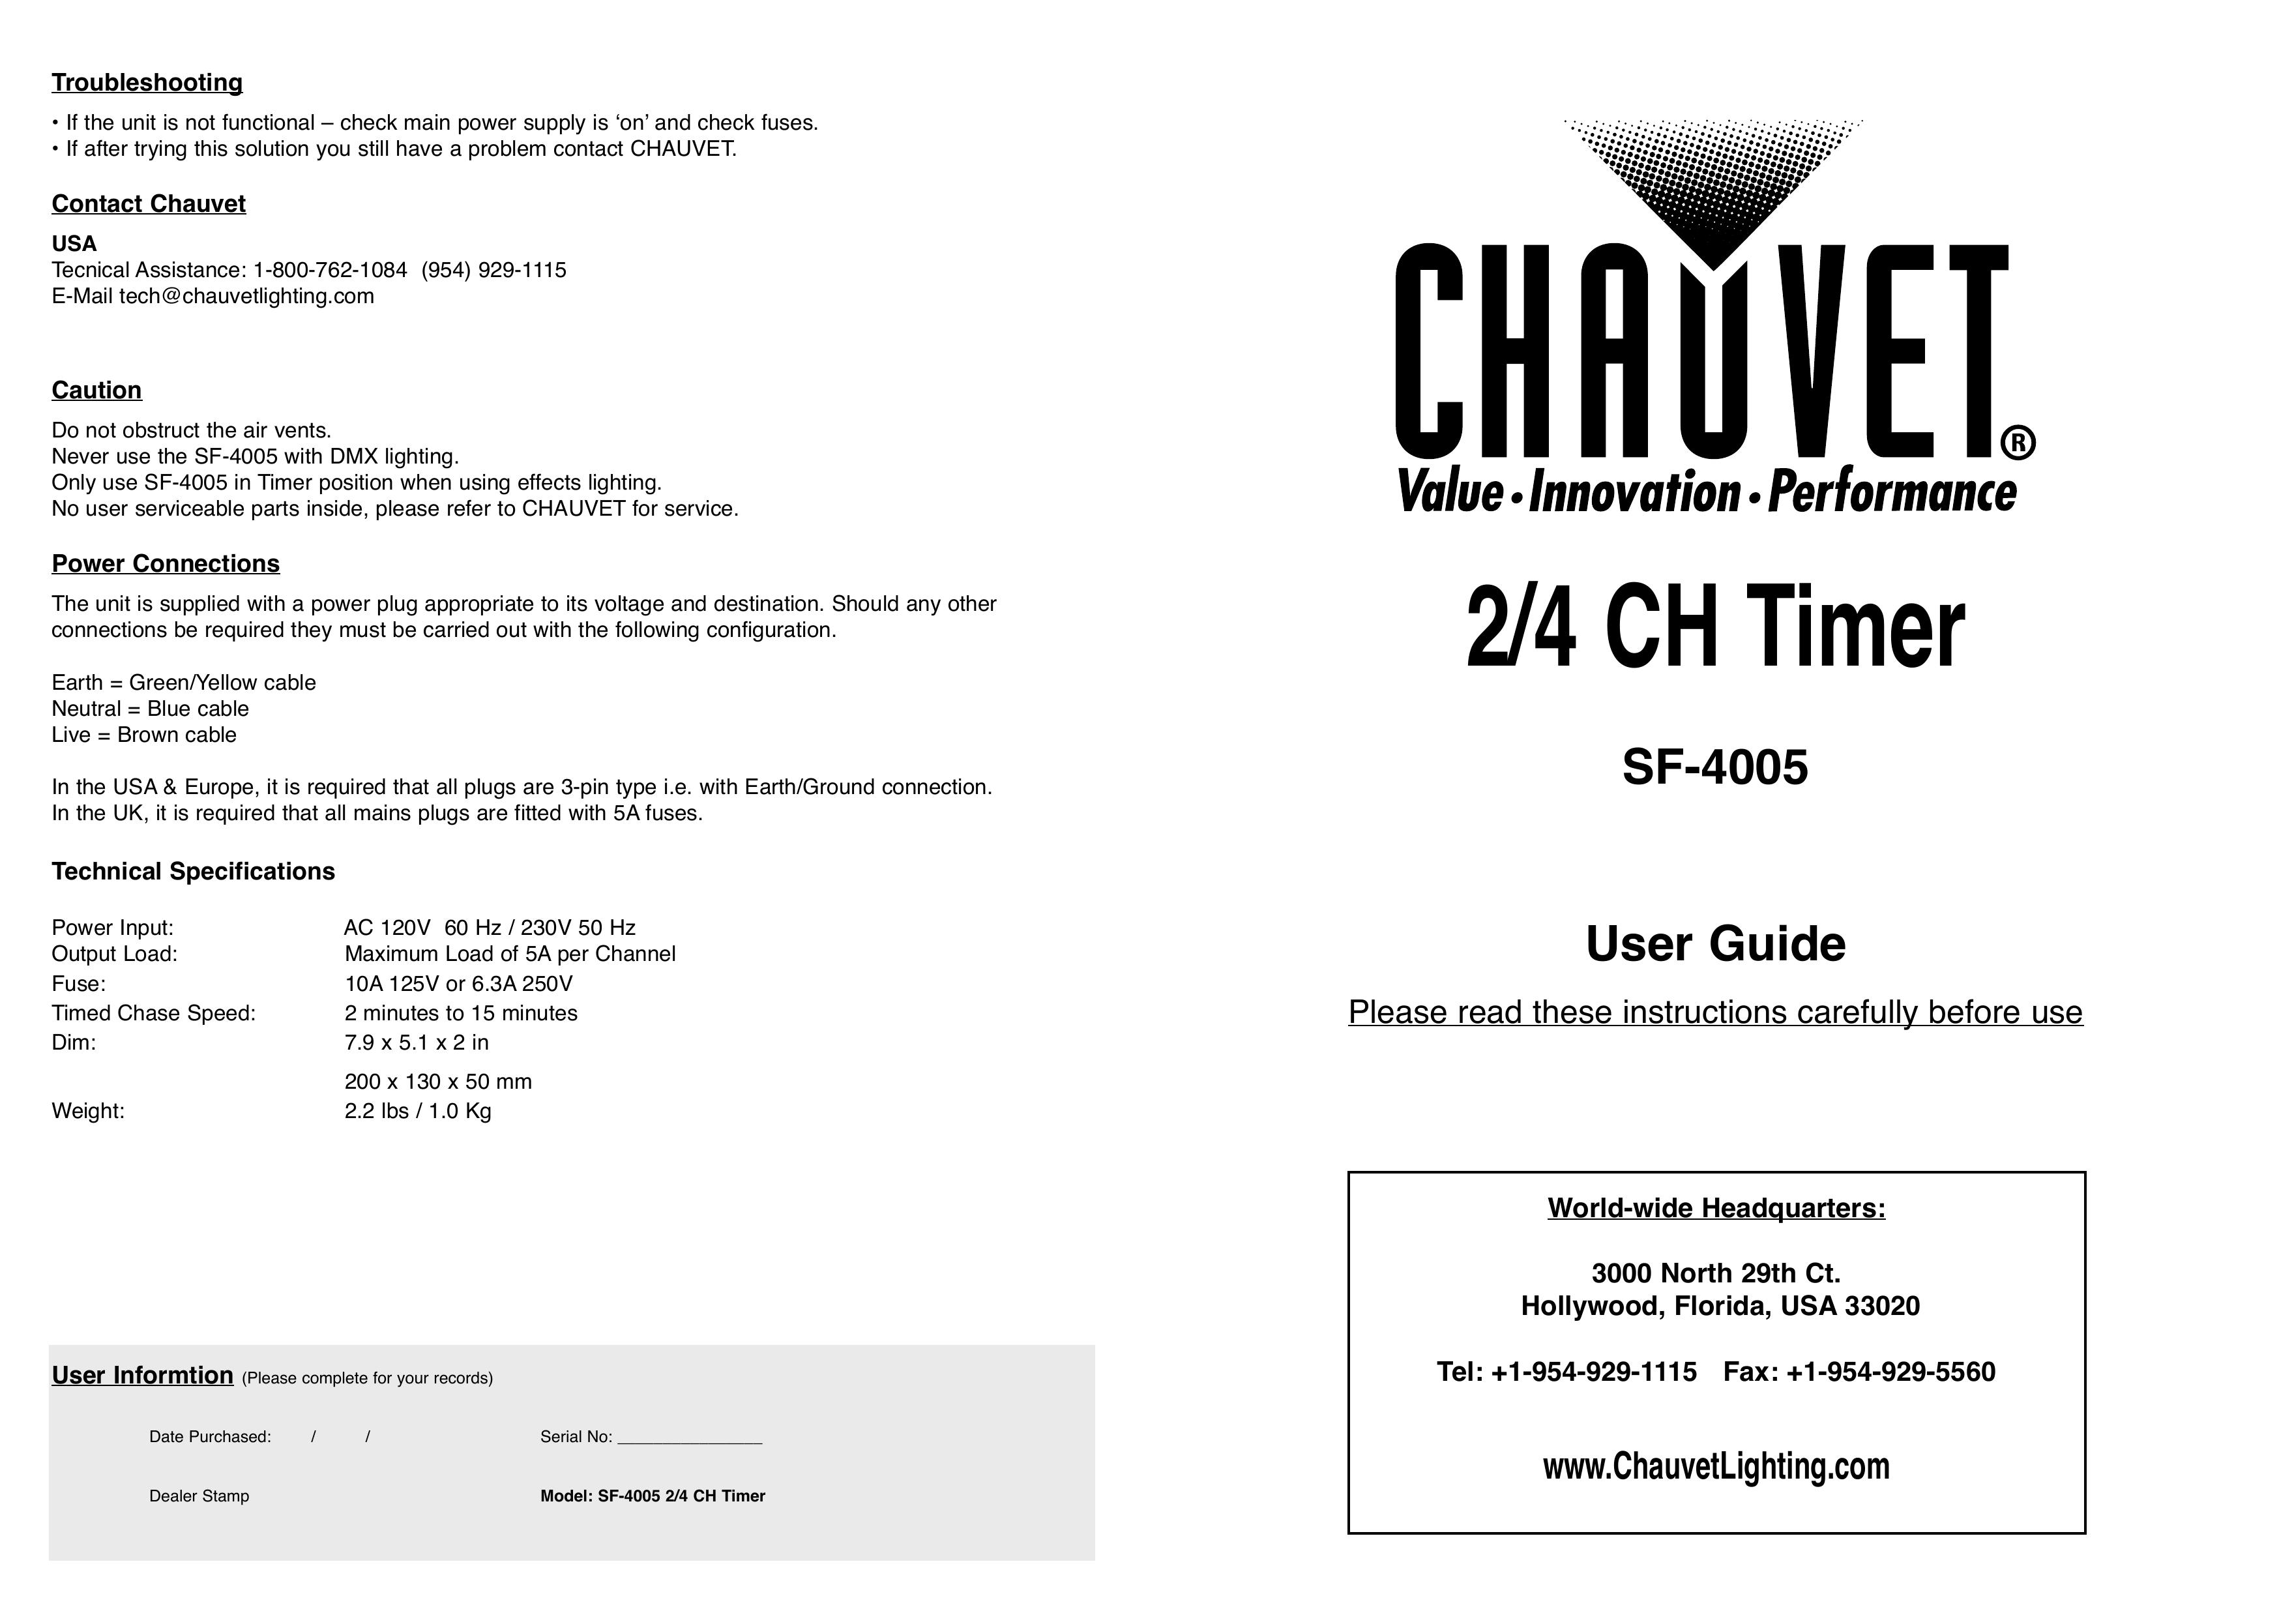 Chauvet SF-4005 Outdoor Timer User Manual